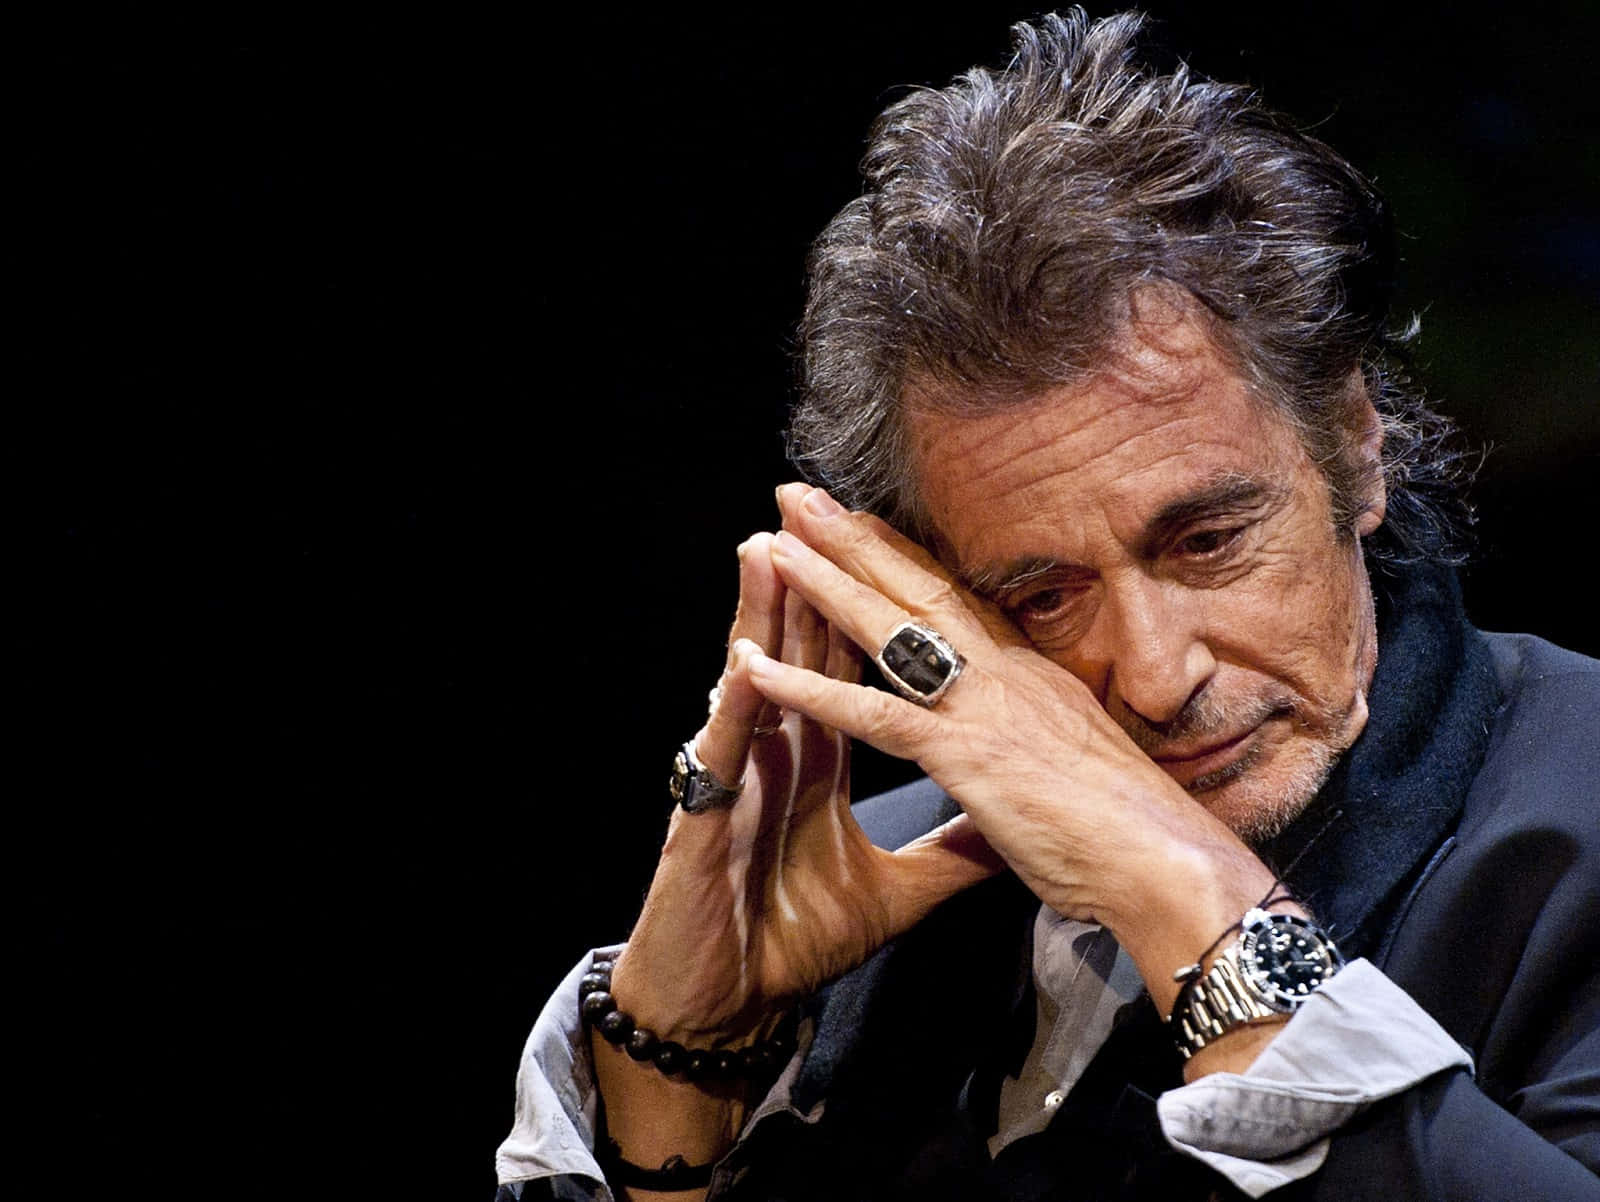 Al Pacino, an actor and director with a career spanning six decades.